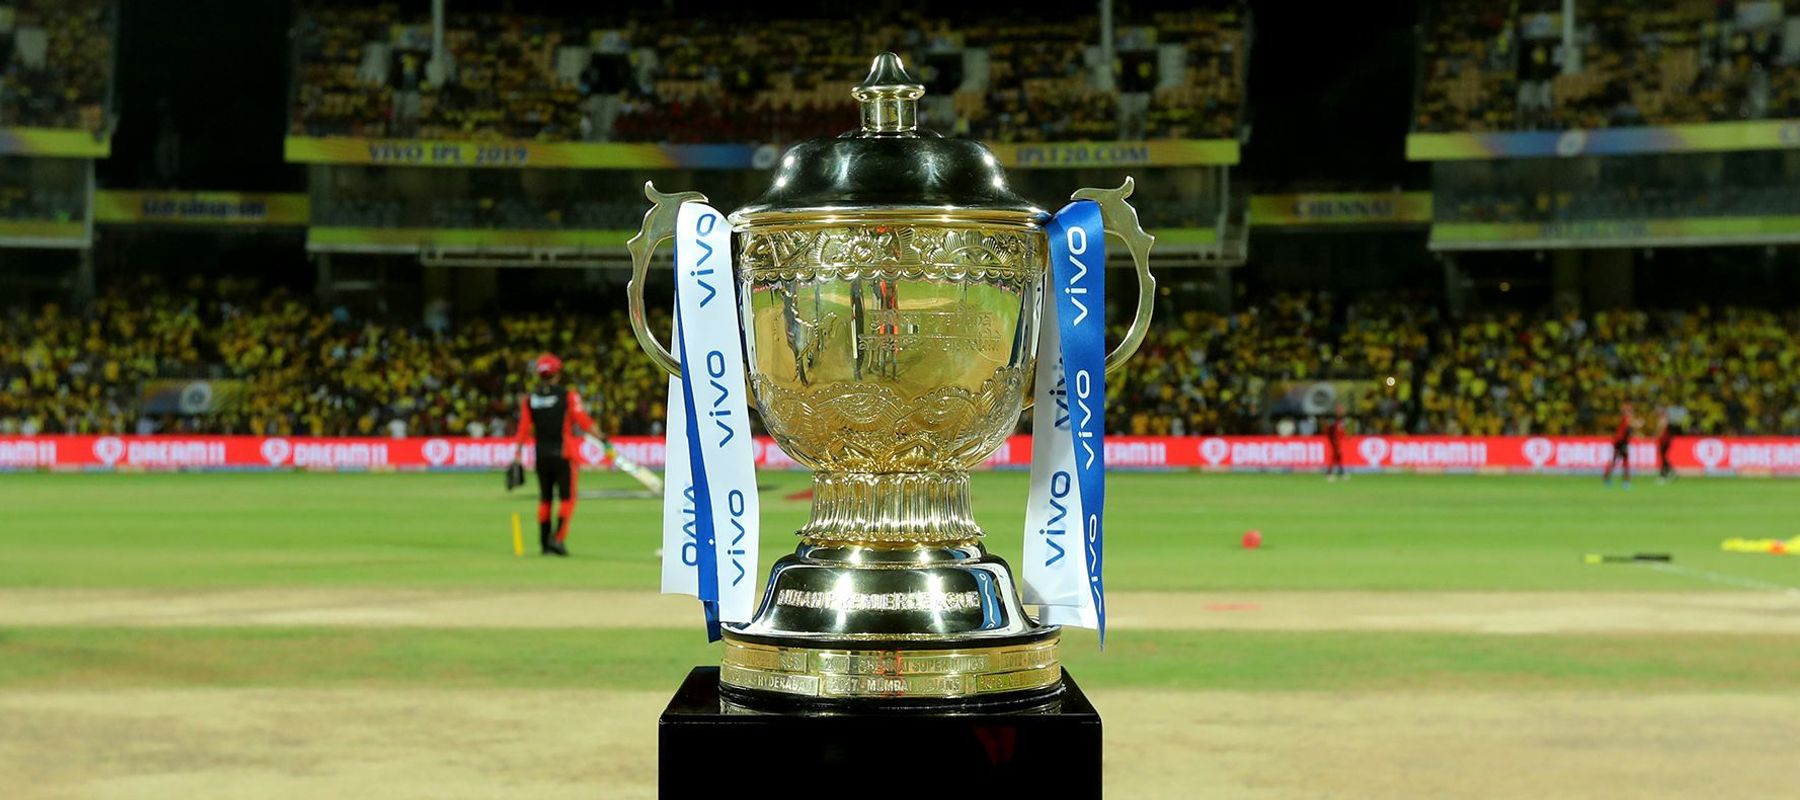 Chennai will host the tournament opener between MI and RCB on April 9